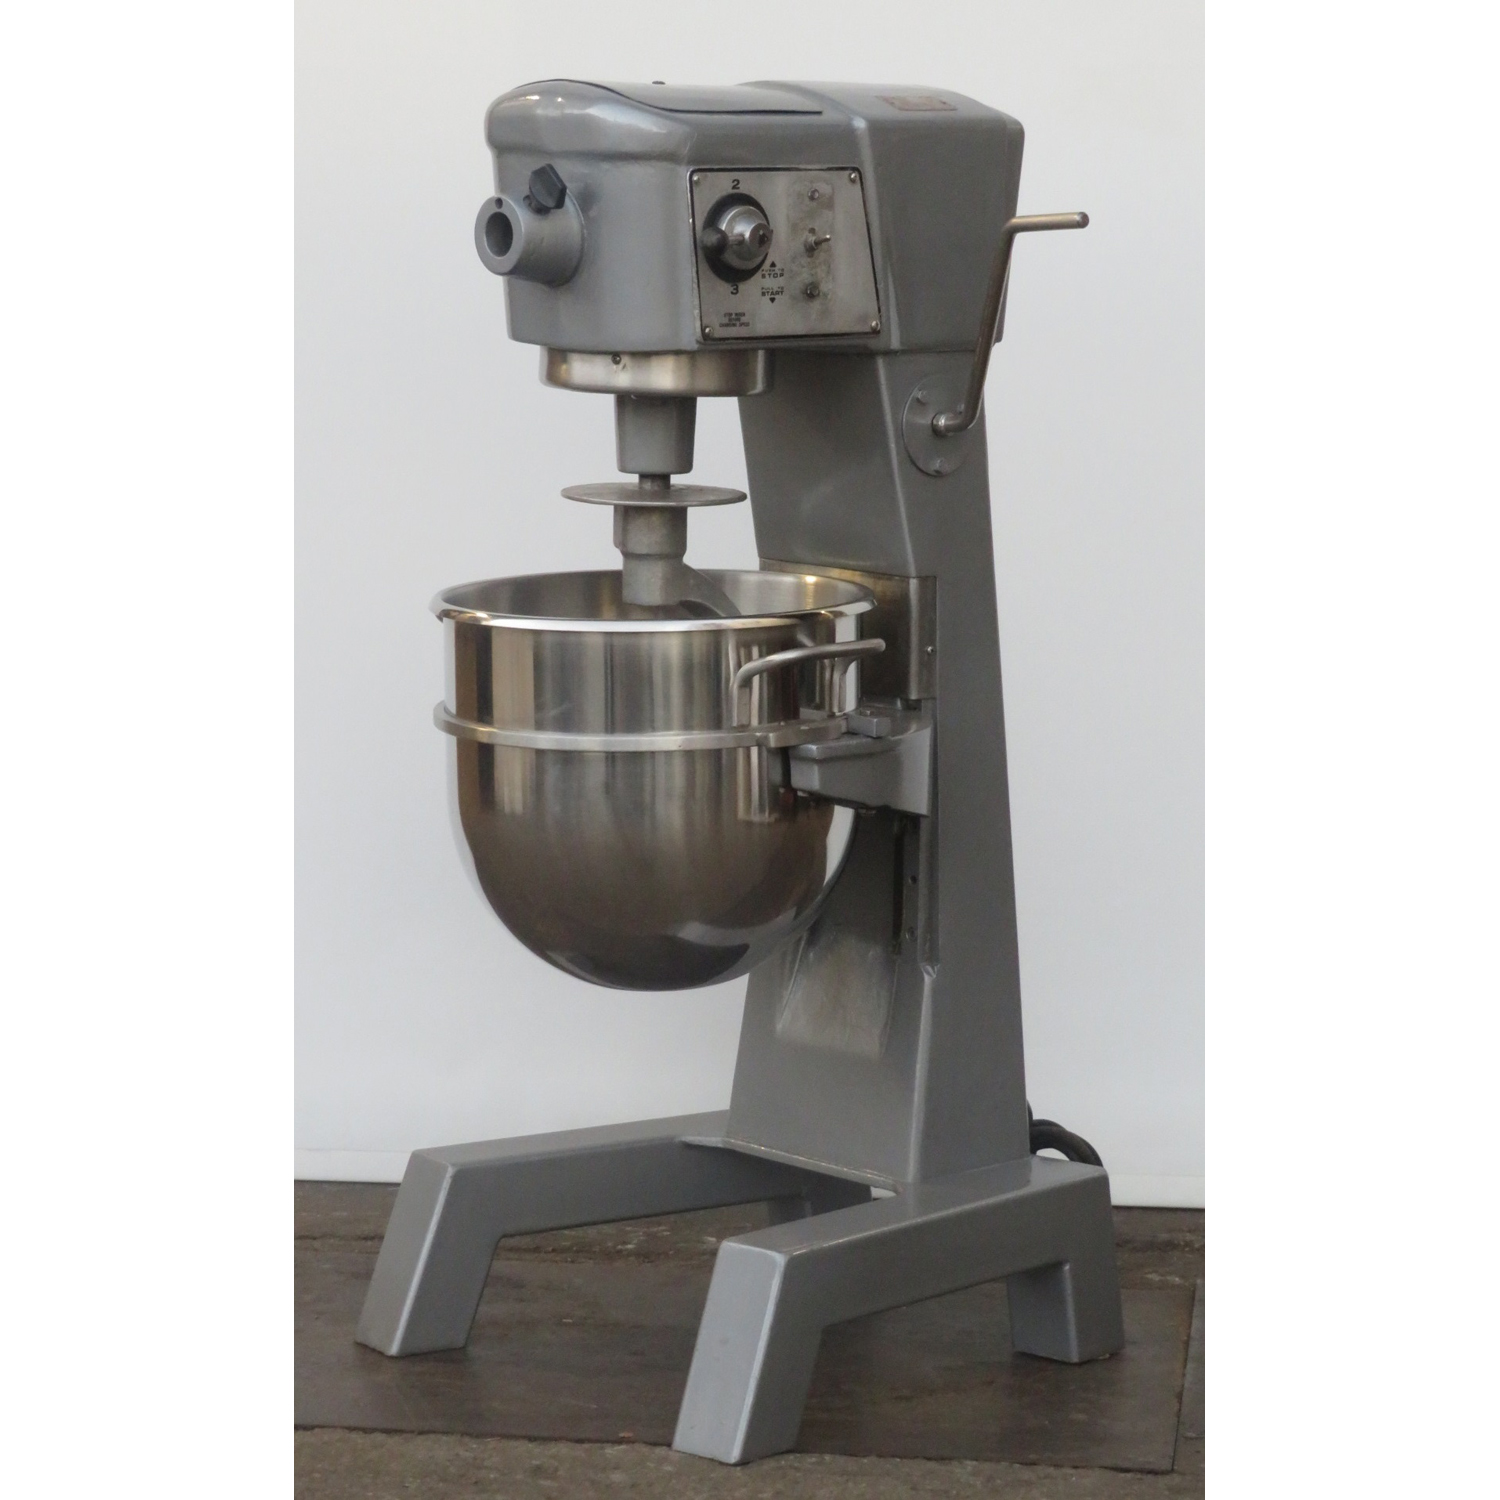 Hobart 30 Quart D300 Mixer, Used Great Condition